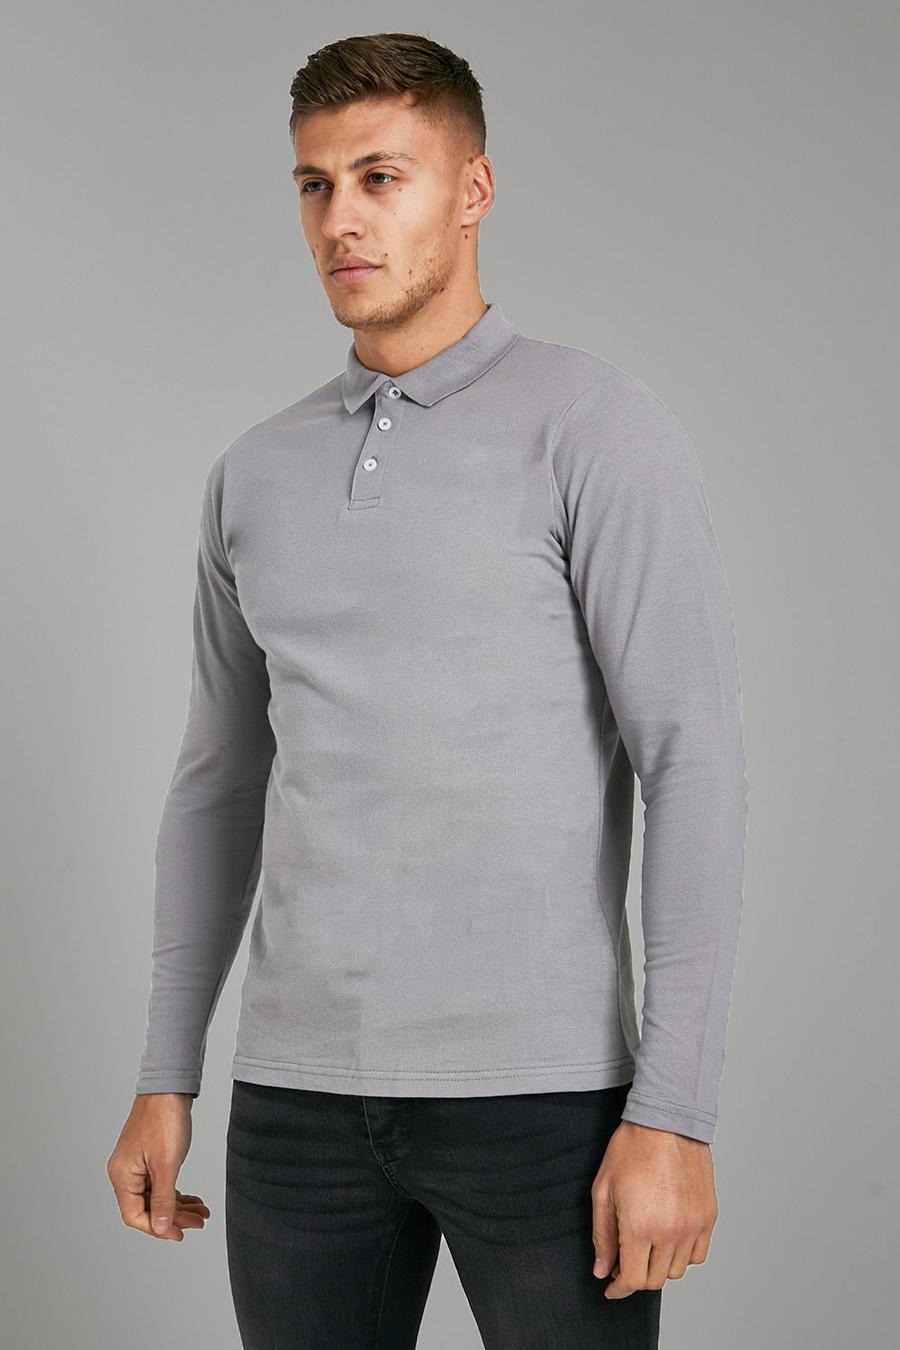 Charcoal gris Slim Fit Long Sleeve Pique Polo